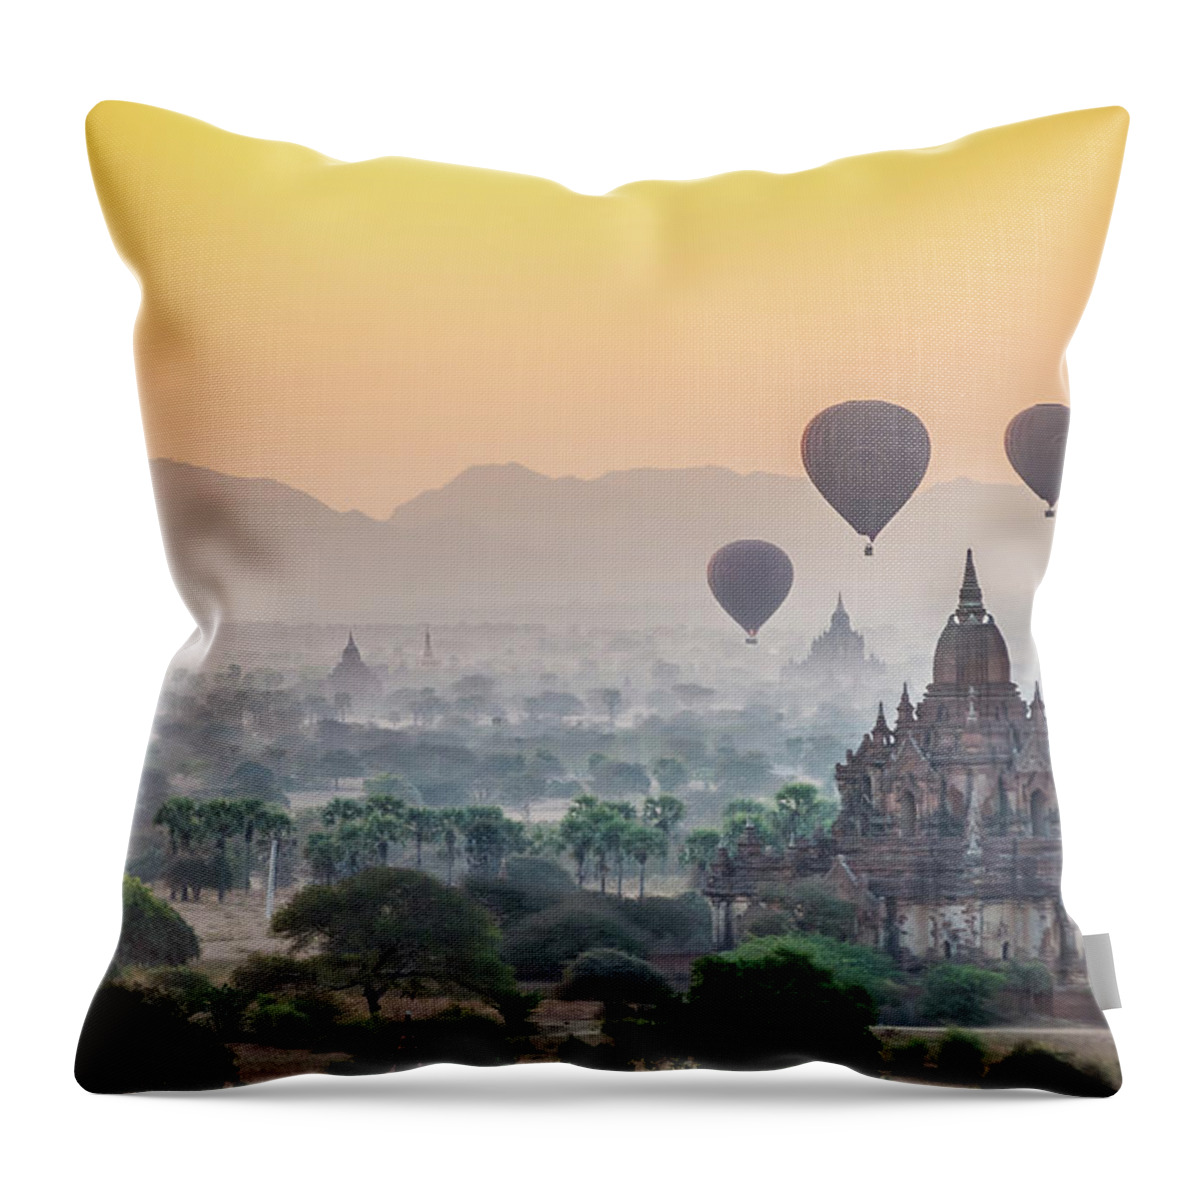 Sunrise Throw Pillow featuring the photograph Sunrise at Bagan by Arj Munoz